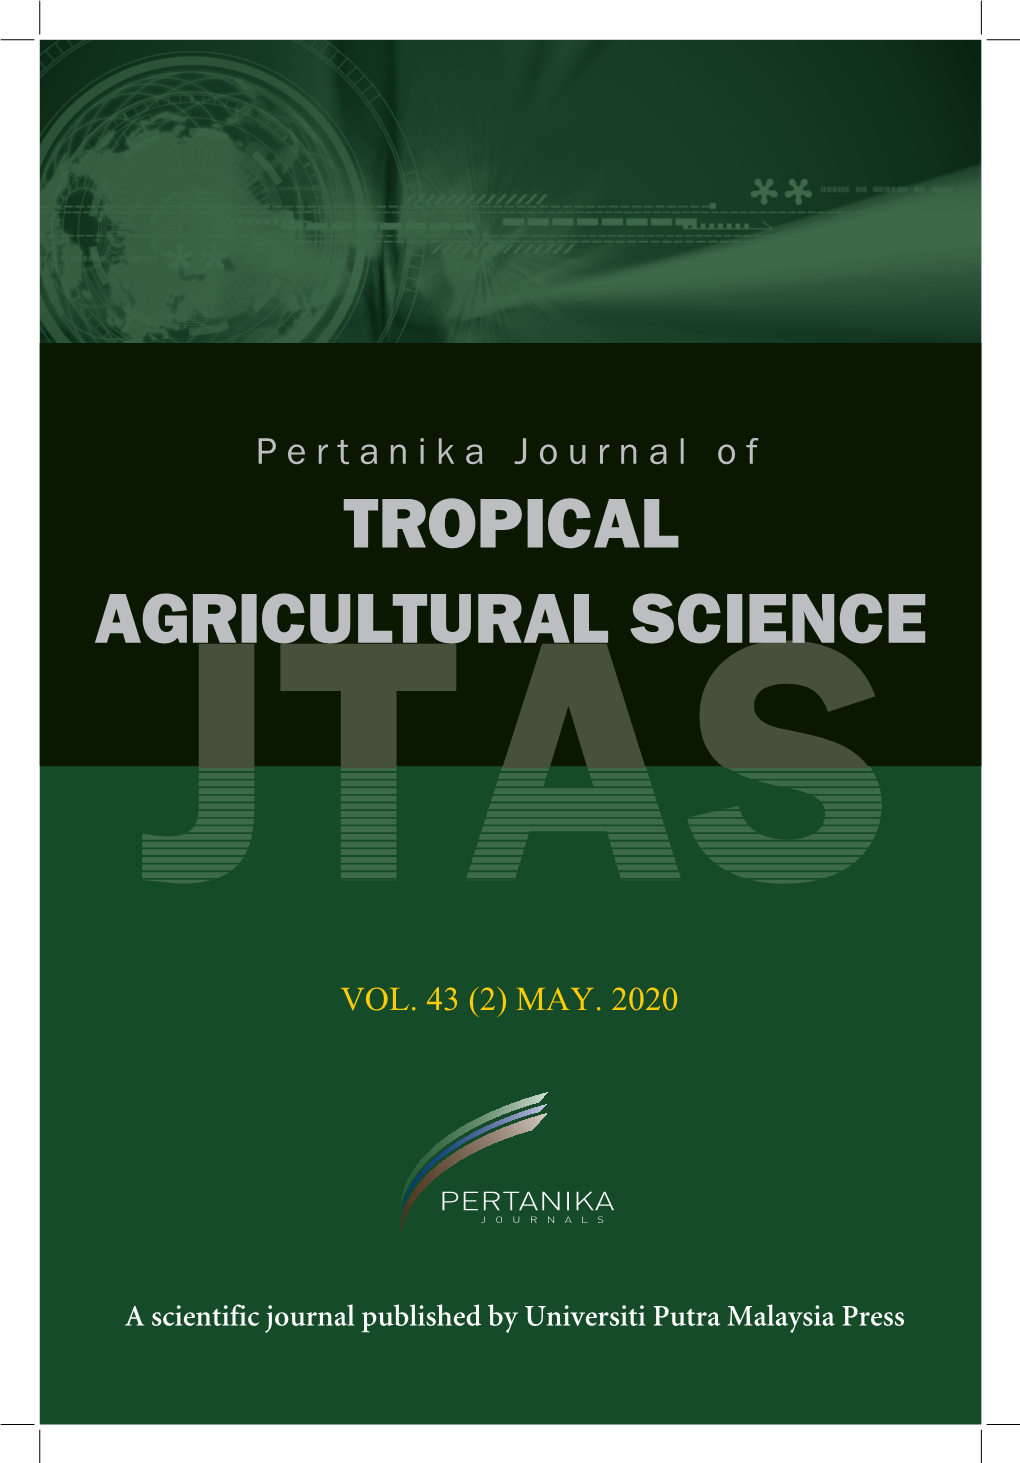 Tropical Agricultural Science Journal of Tropical Agricultural Science Journal of Tropical Agricultural Science VOL